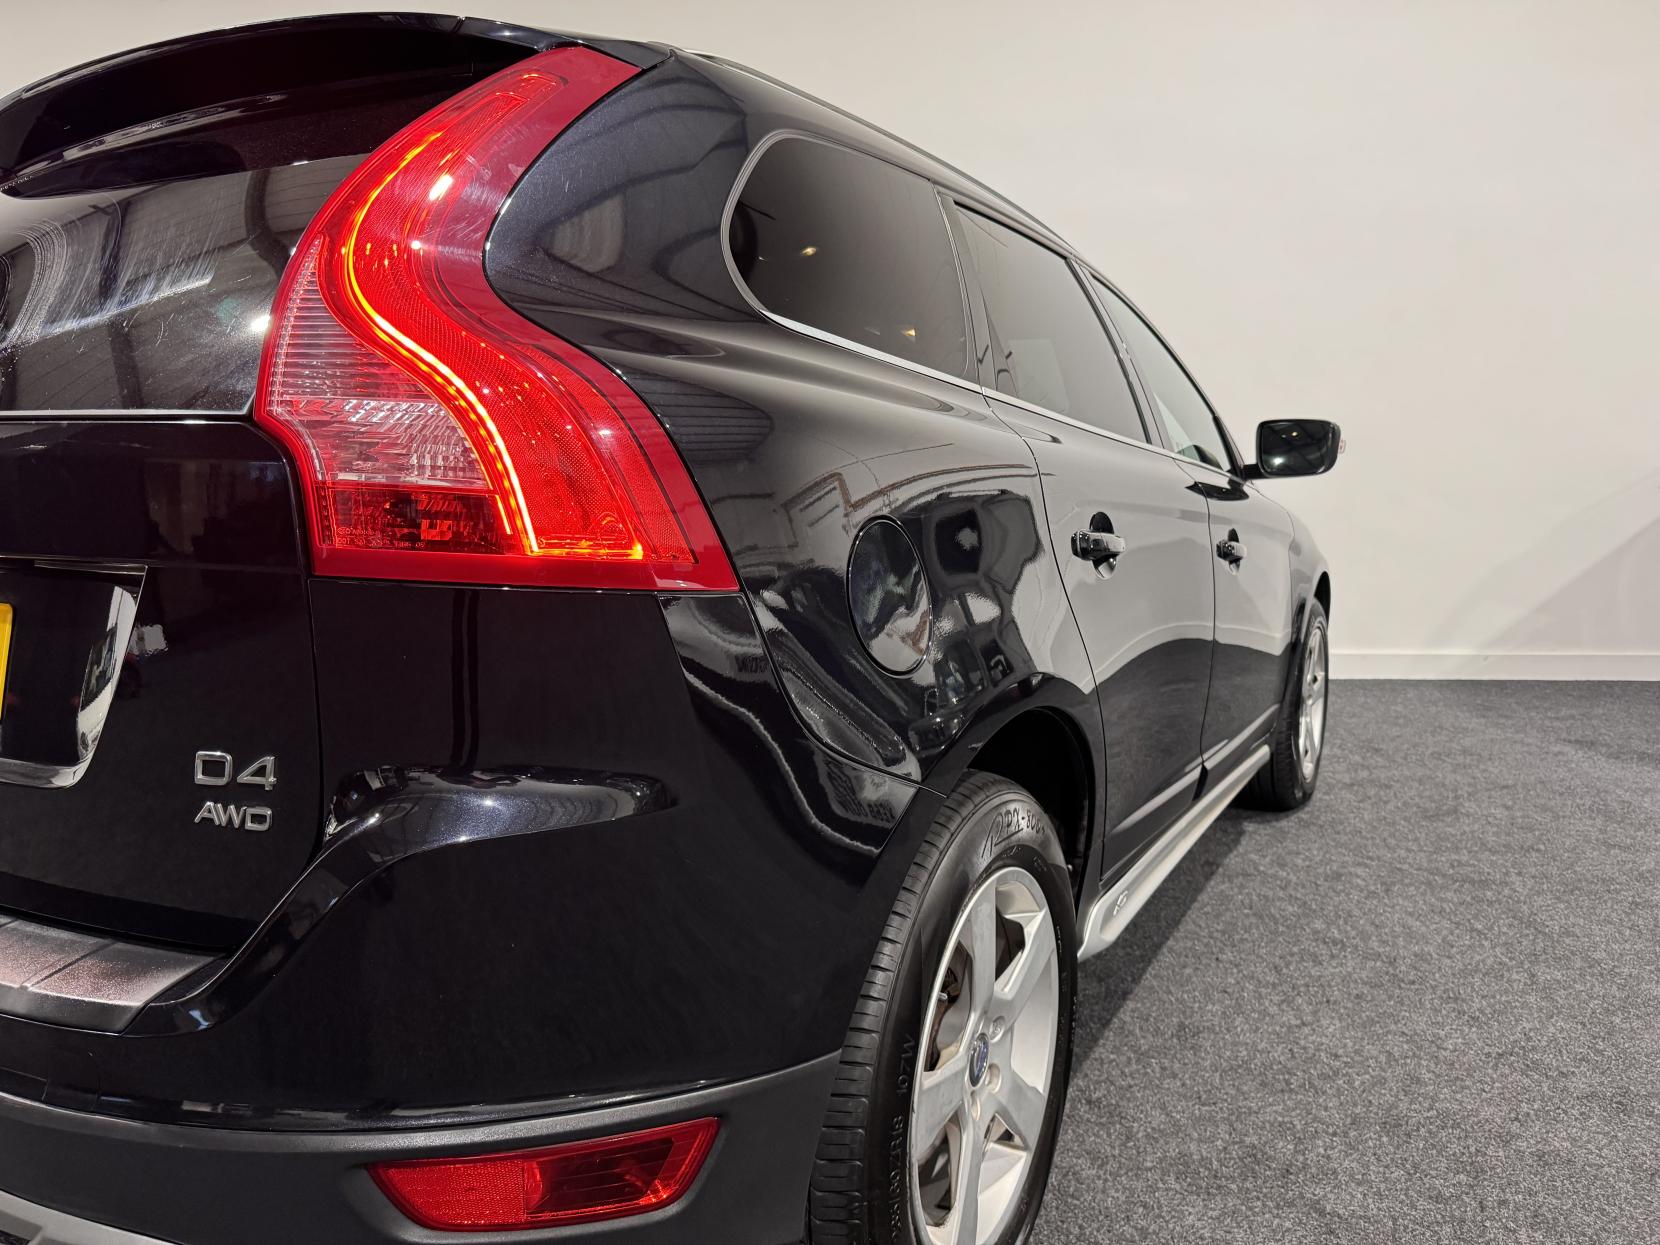 Volvo XC60 2.4 D4 R-Design Nav SUV 5dr Diesel Geartronic AWD Euro 5 (163 ps)